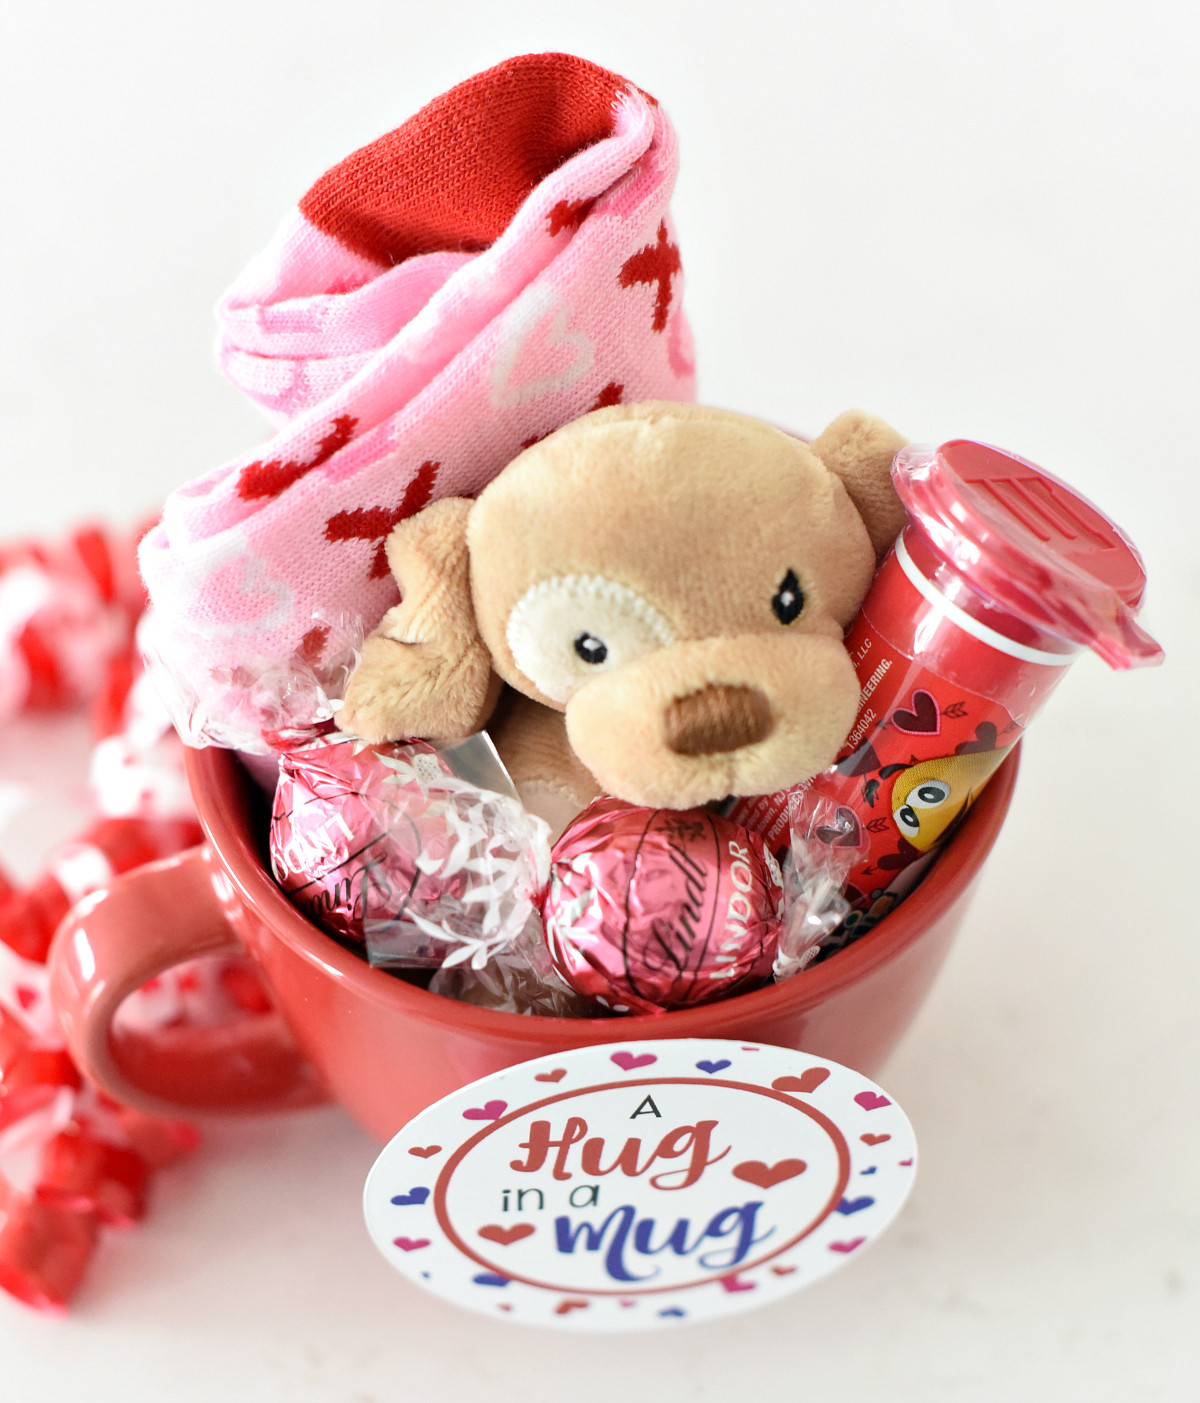 Ideas For Valentines Gift
 Fun Valentines Gift Idea for Kids – Fun Squared